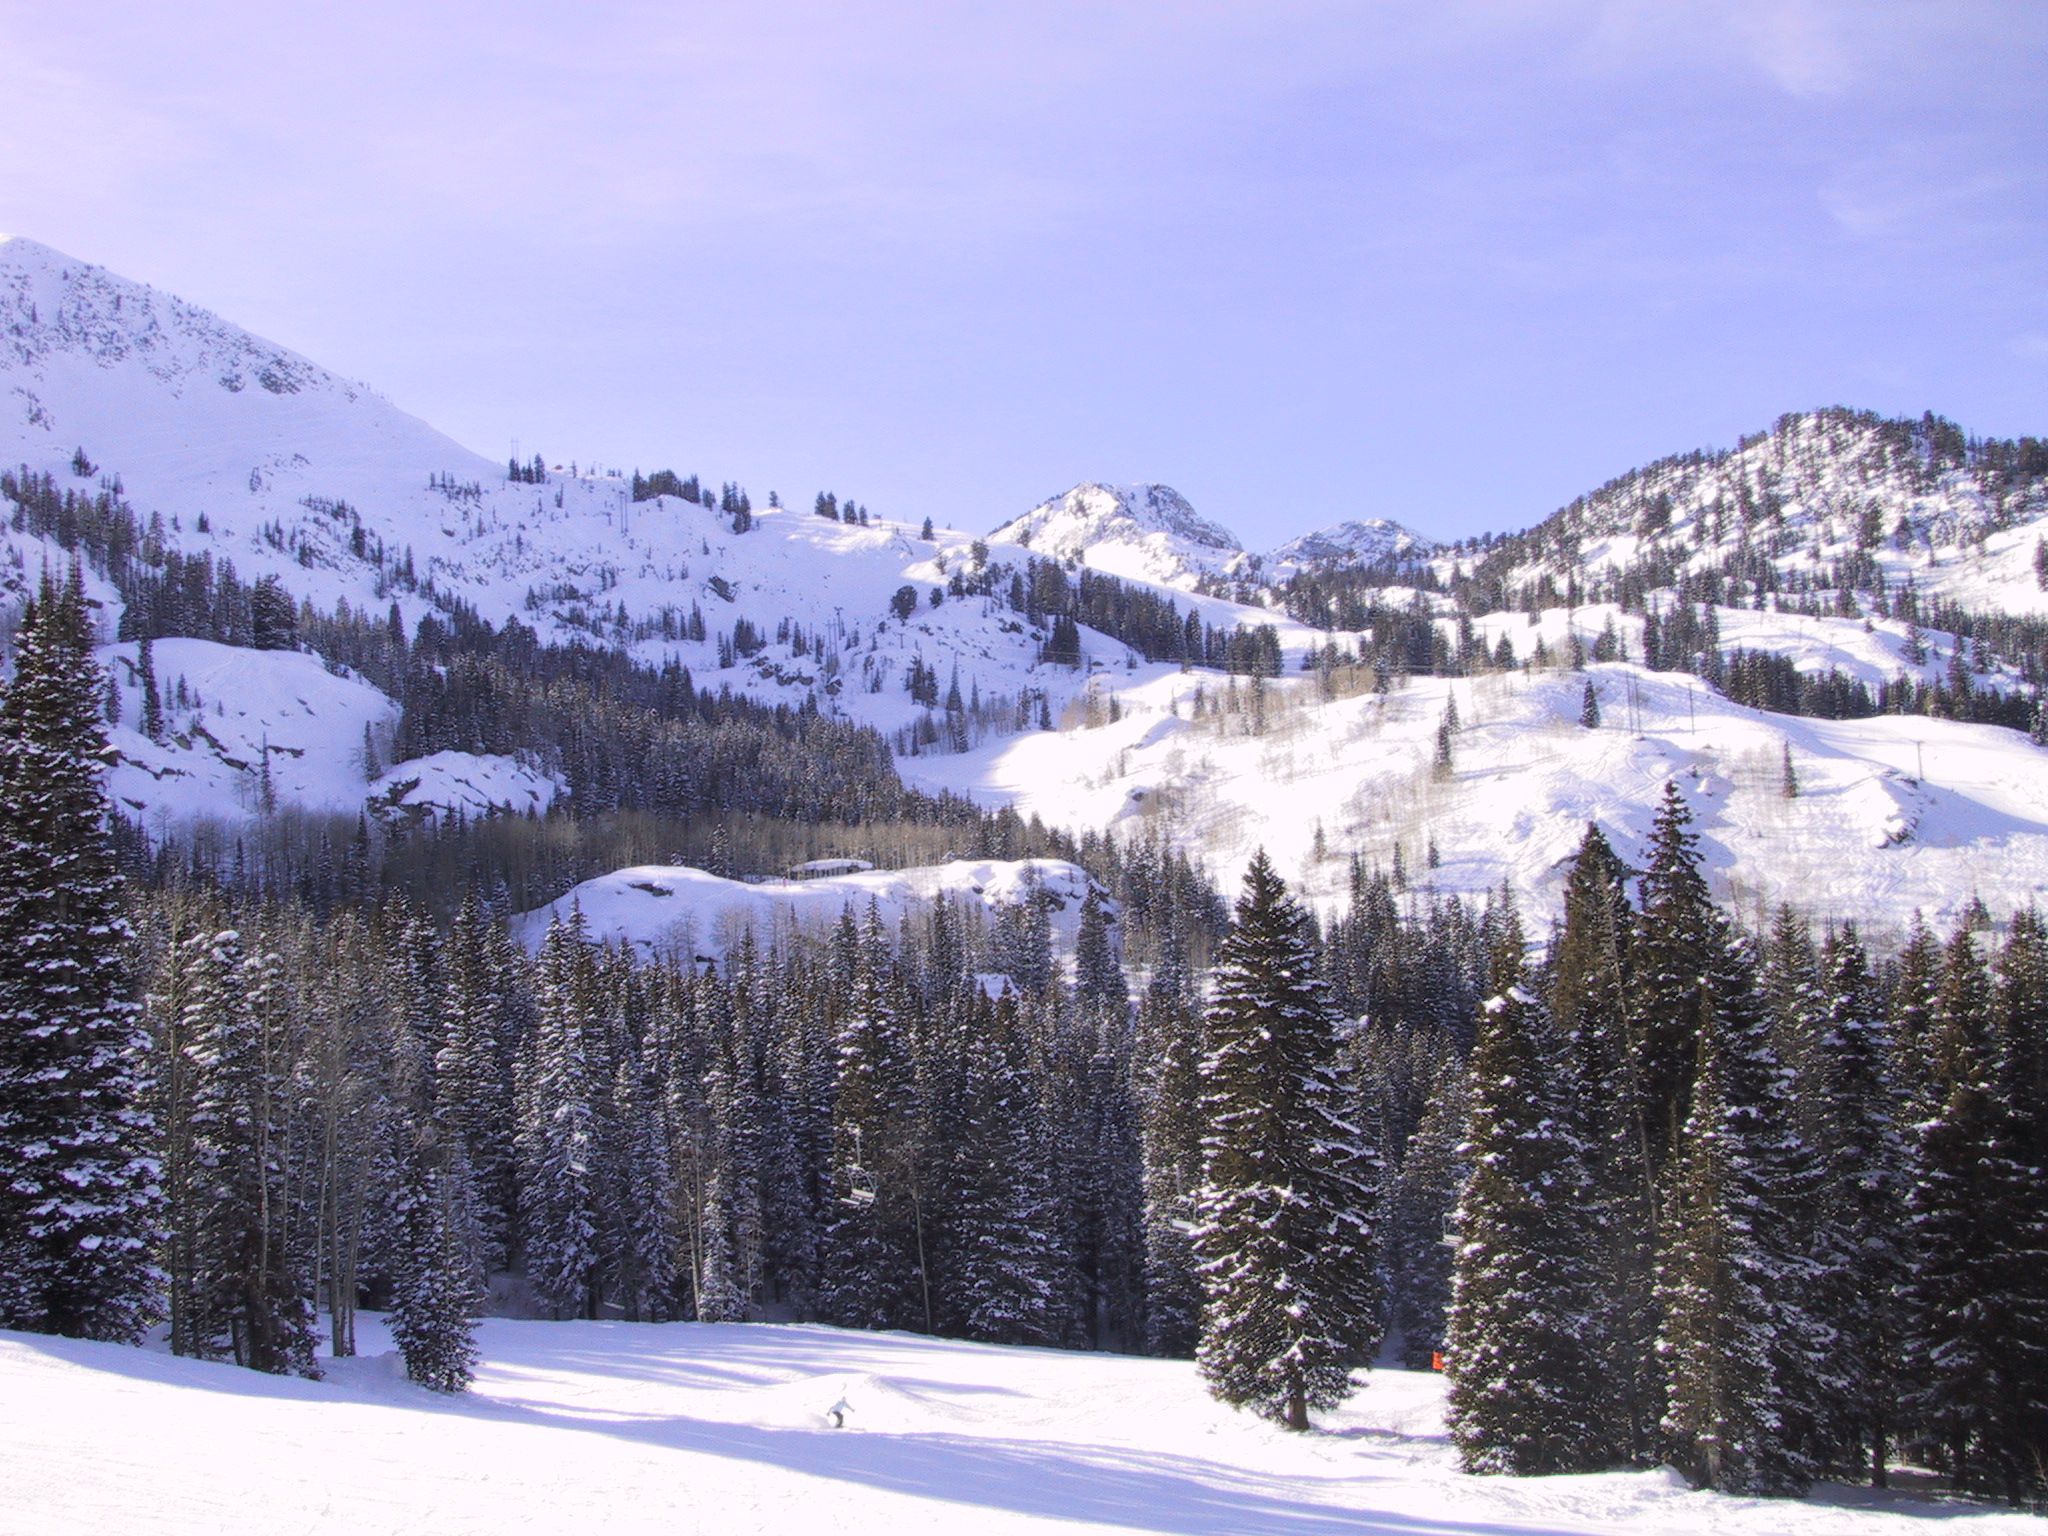 Brighton Resort is offered now on the IKON Pass.